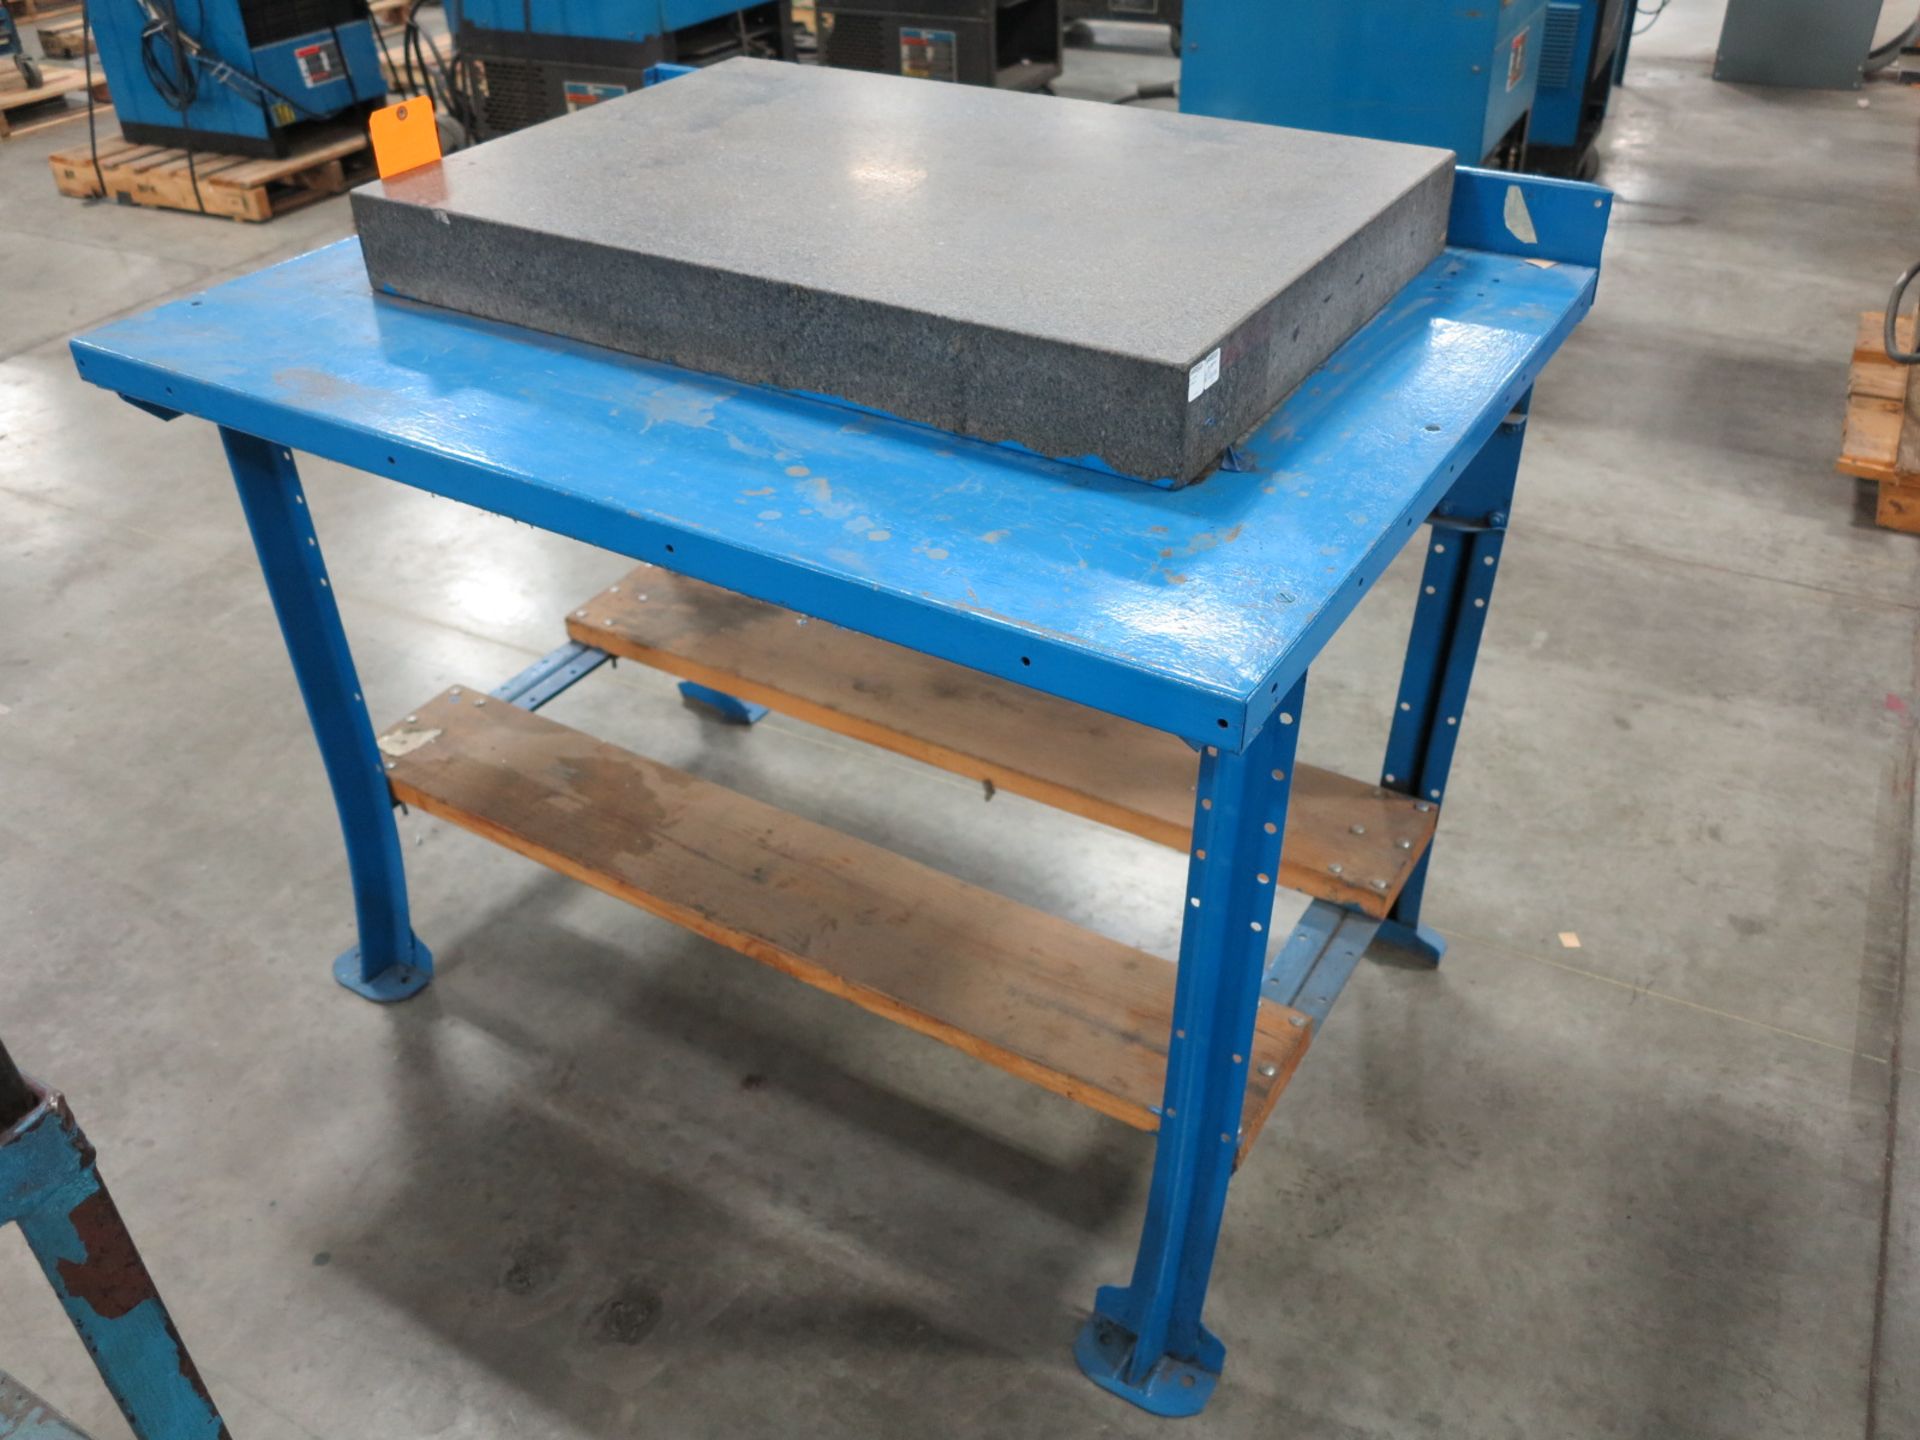 Granite Surface Plate w/ Stand, 36" x 24" x 4" - Image 2 of 2